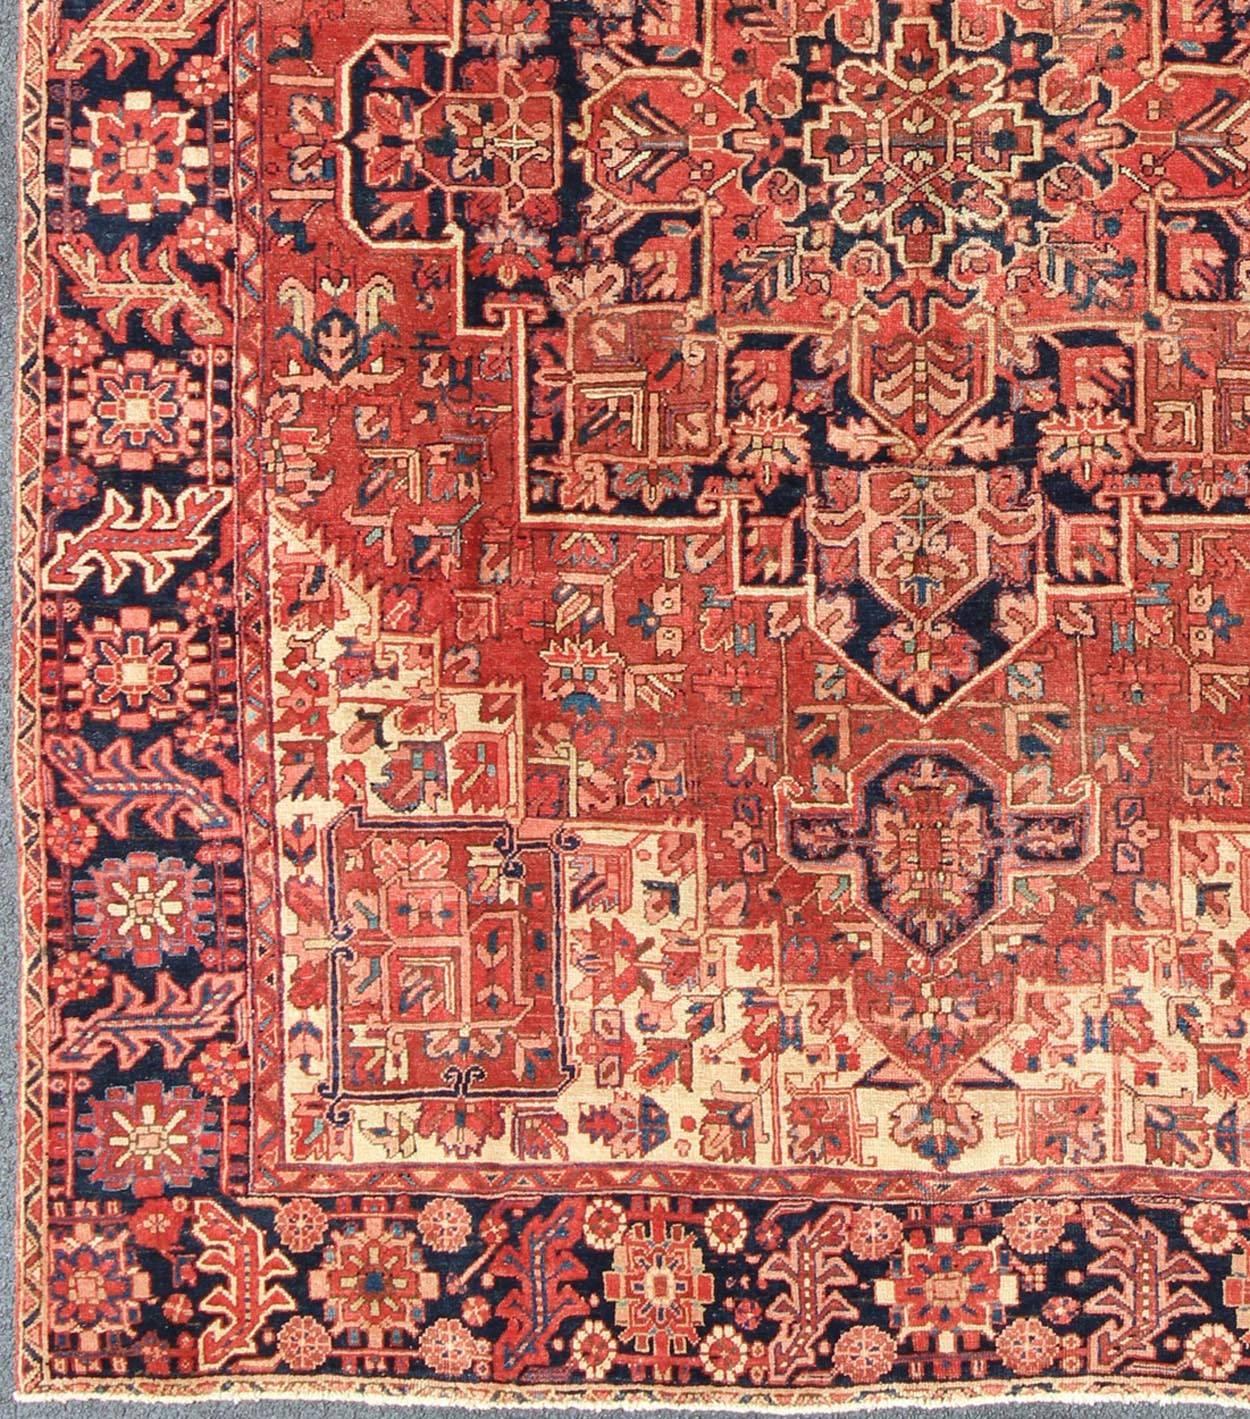 Persian Heriz Rug with Stylized Geometric Medallion in Rust and Blue. Keivan Woven Arts; rug H-1006-14, country of origin / type: Iran / Heriz, circa 1950.
Measures: 9'7 x 12'7. 
This Persian Heriz carpet from the mid-20th century bears an exquisite